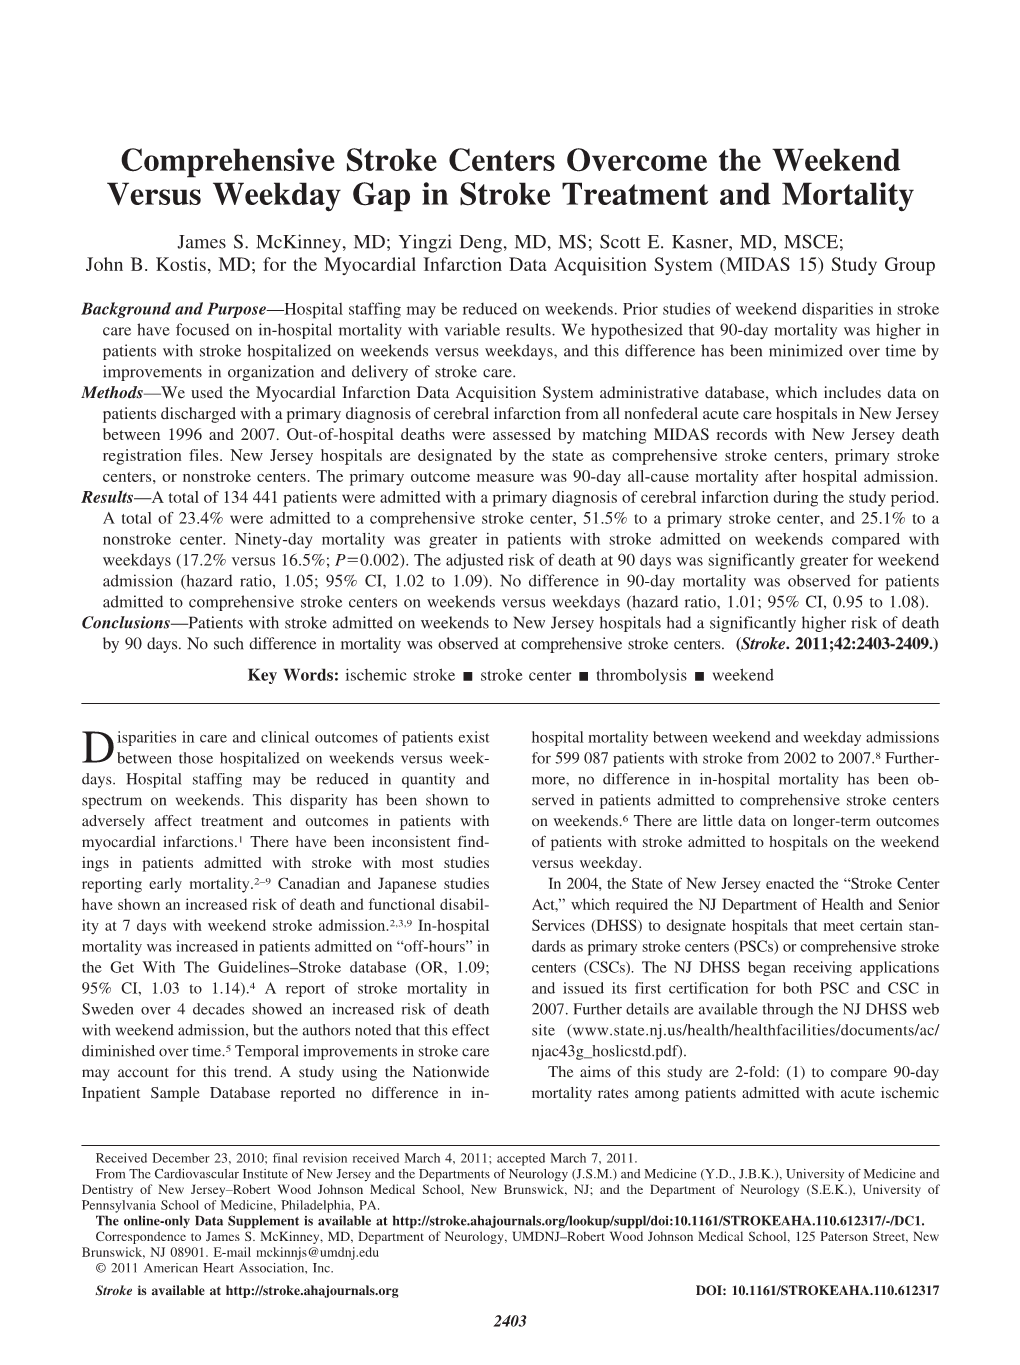 Comprehensive Stroke Centers Overcome the Weekend Versus Weekday Gap in Stroke Treatment and Mortality